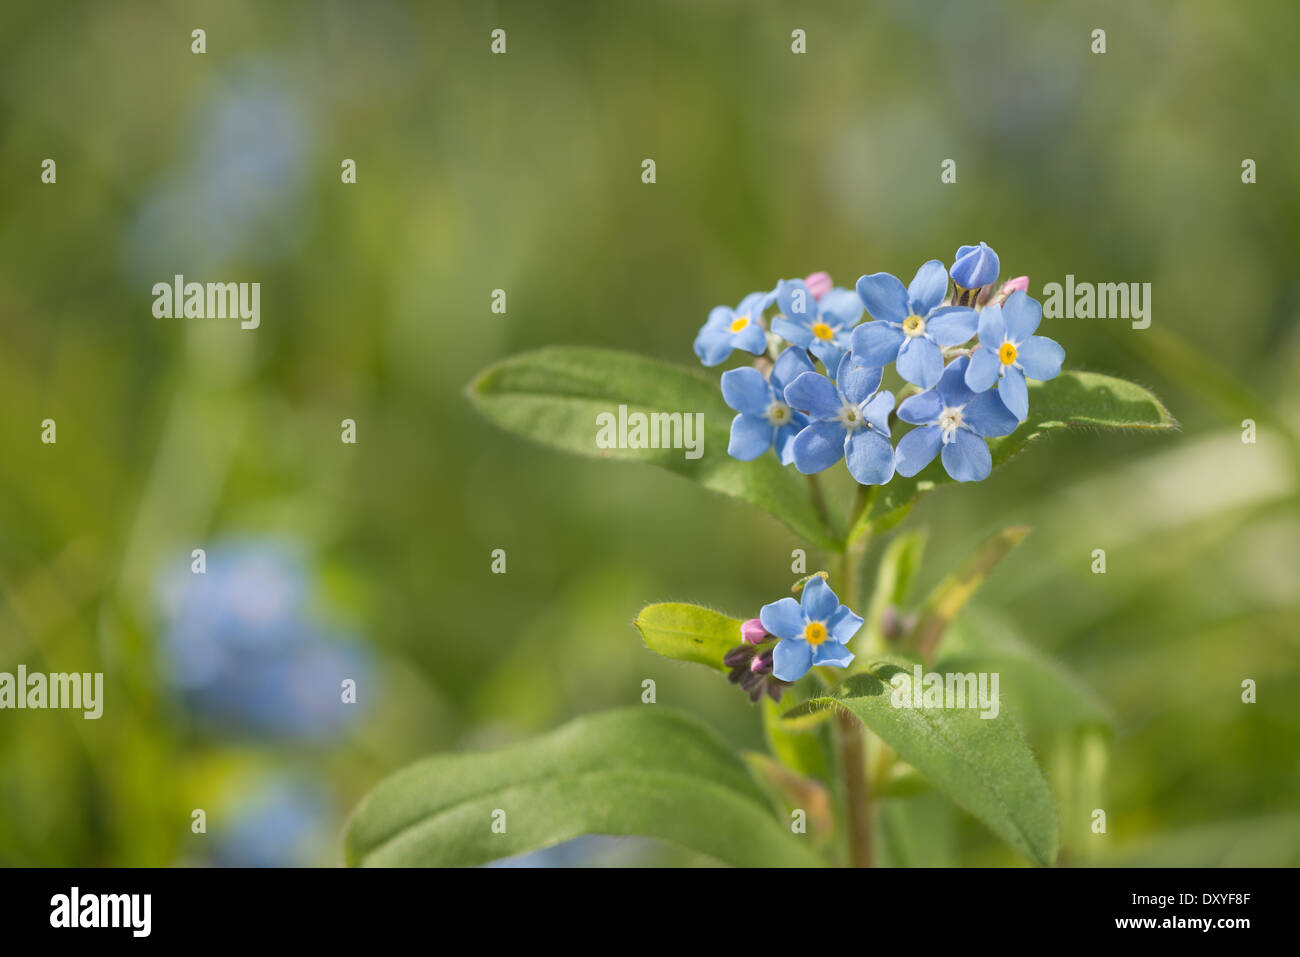 single bunch of blooms of forget-me-not  flowers against a shallow depth of field background of out of focus Stock Photo